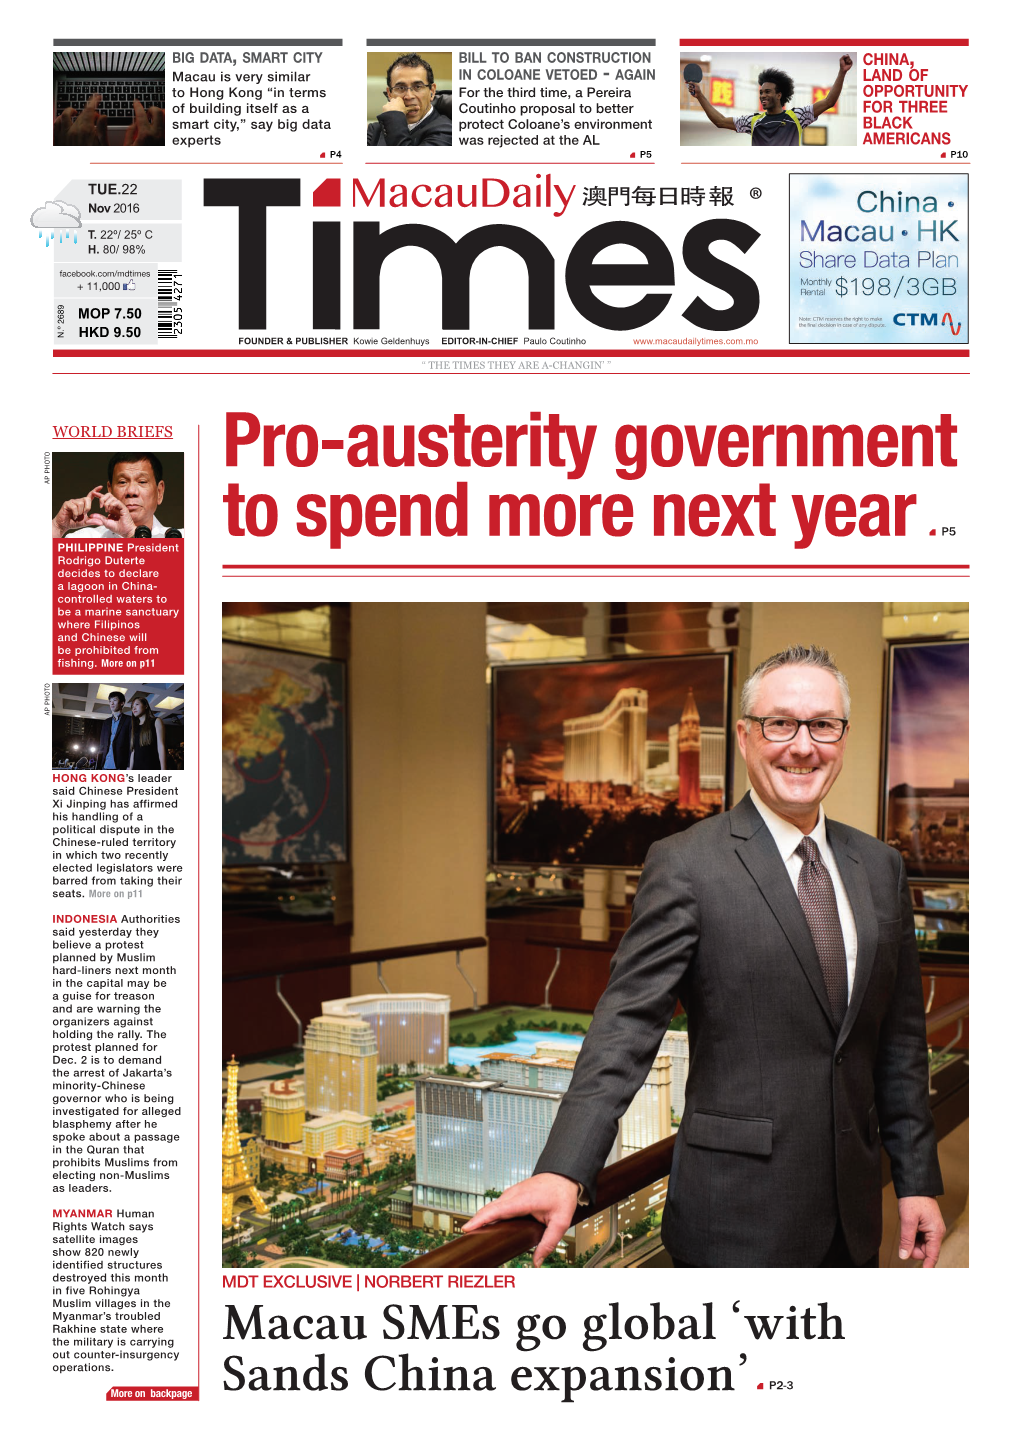 Pro-Austerity Government to Spend More Next Year P5